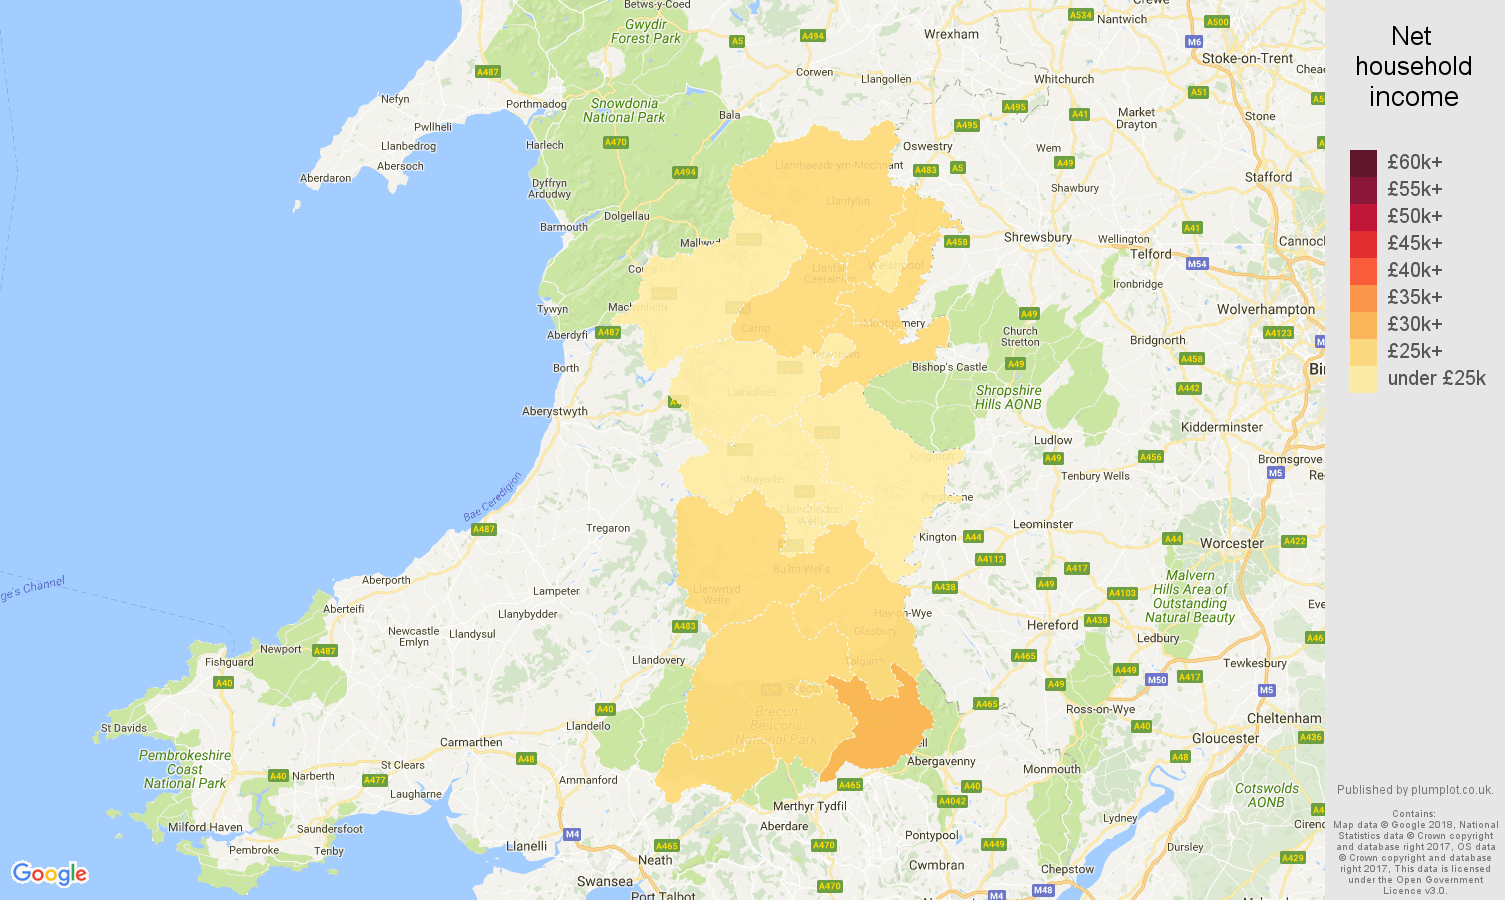 Powys net household income map